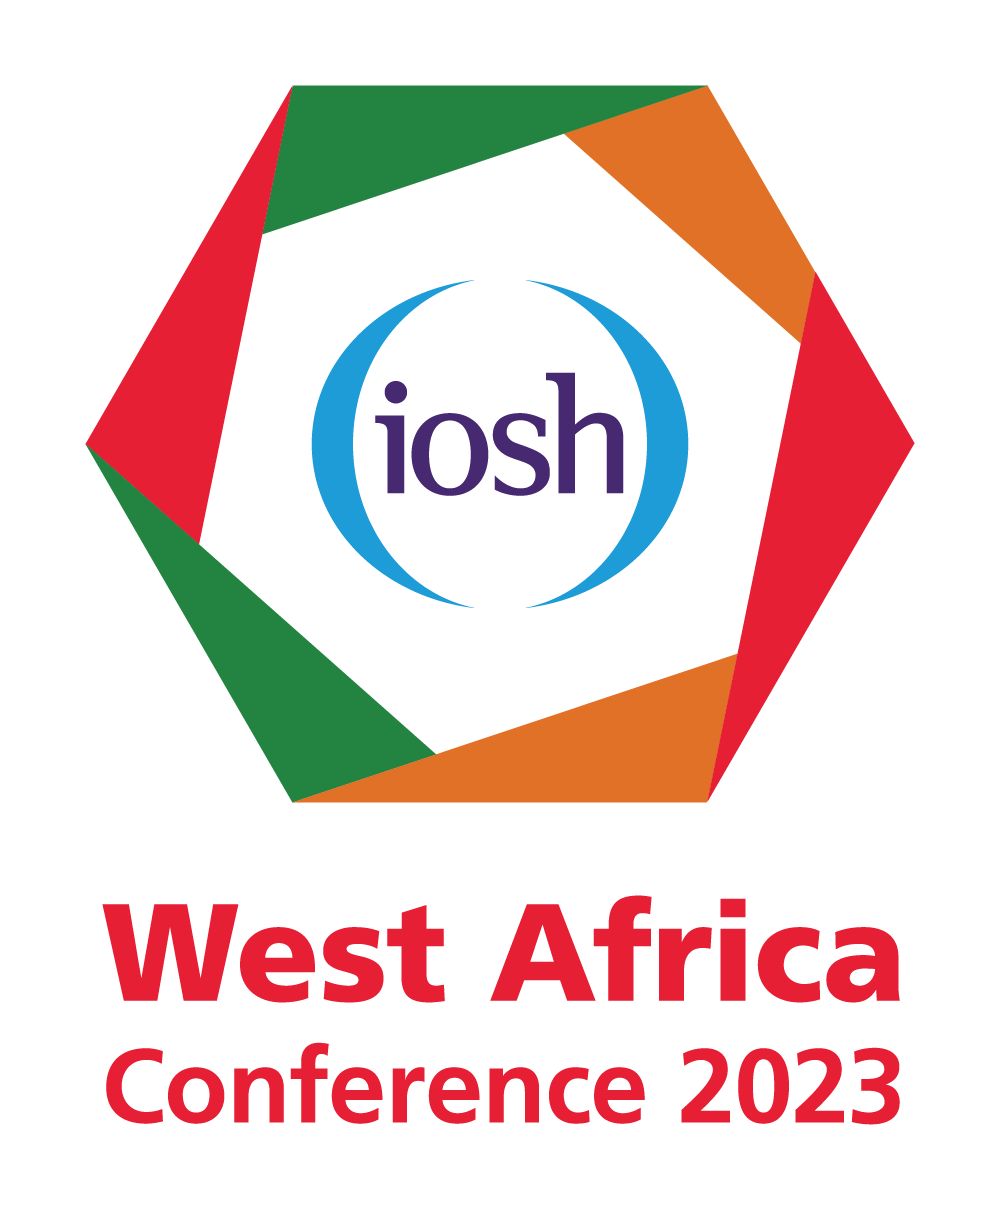 Global body’s West Africa Conference to explore health and safety at work rights